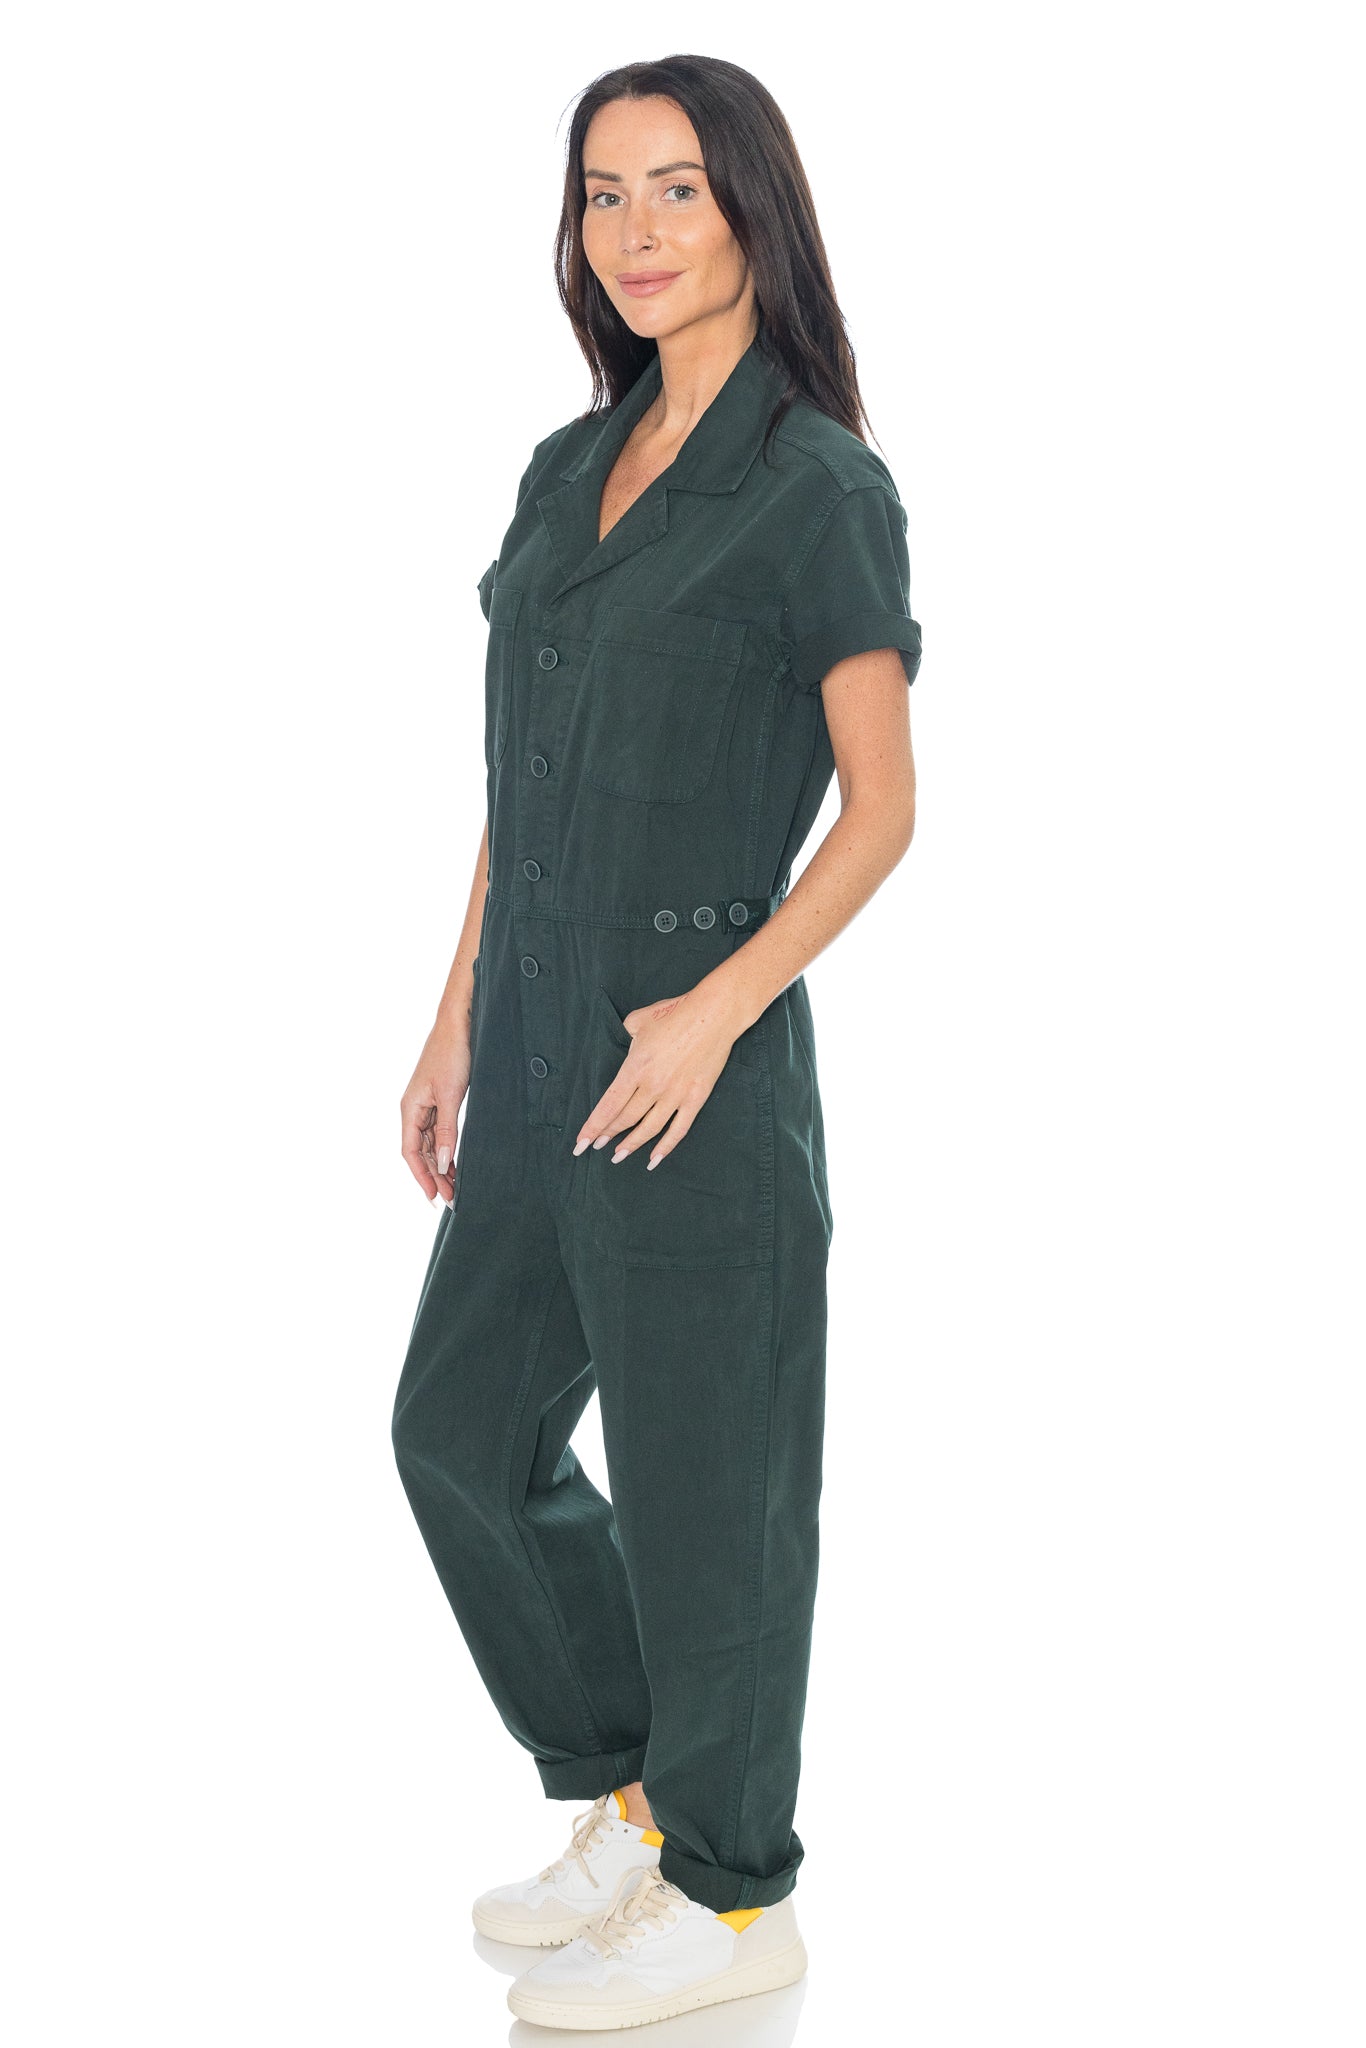 Grover Jumpsuit by Pistola